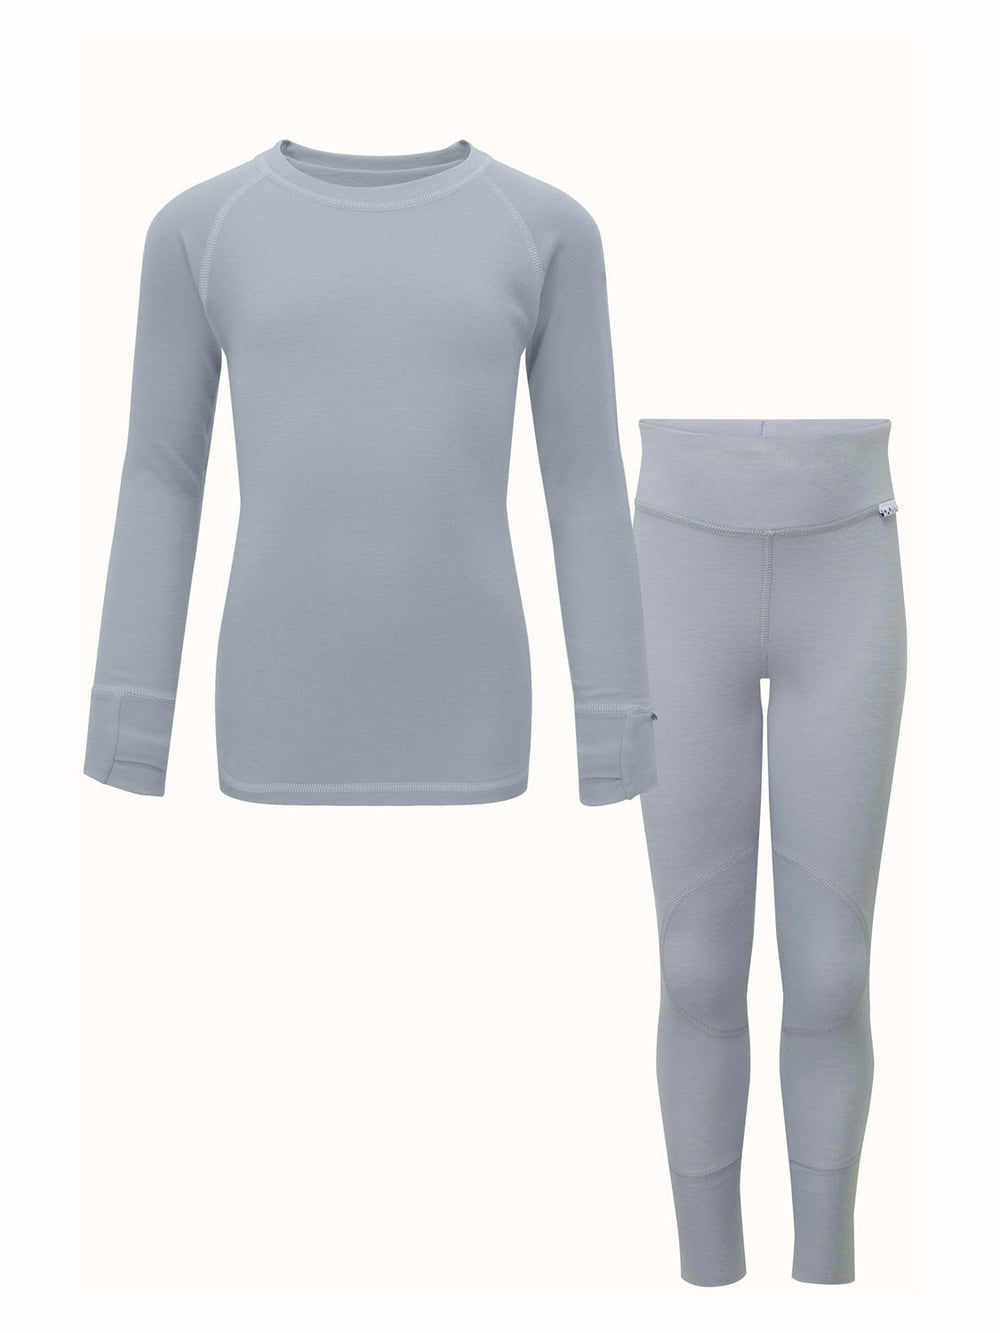 Elowel Thermal Underwear Set for Girls Kids Thermals Base Layer XS Gray 